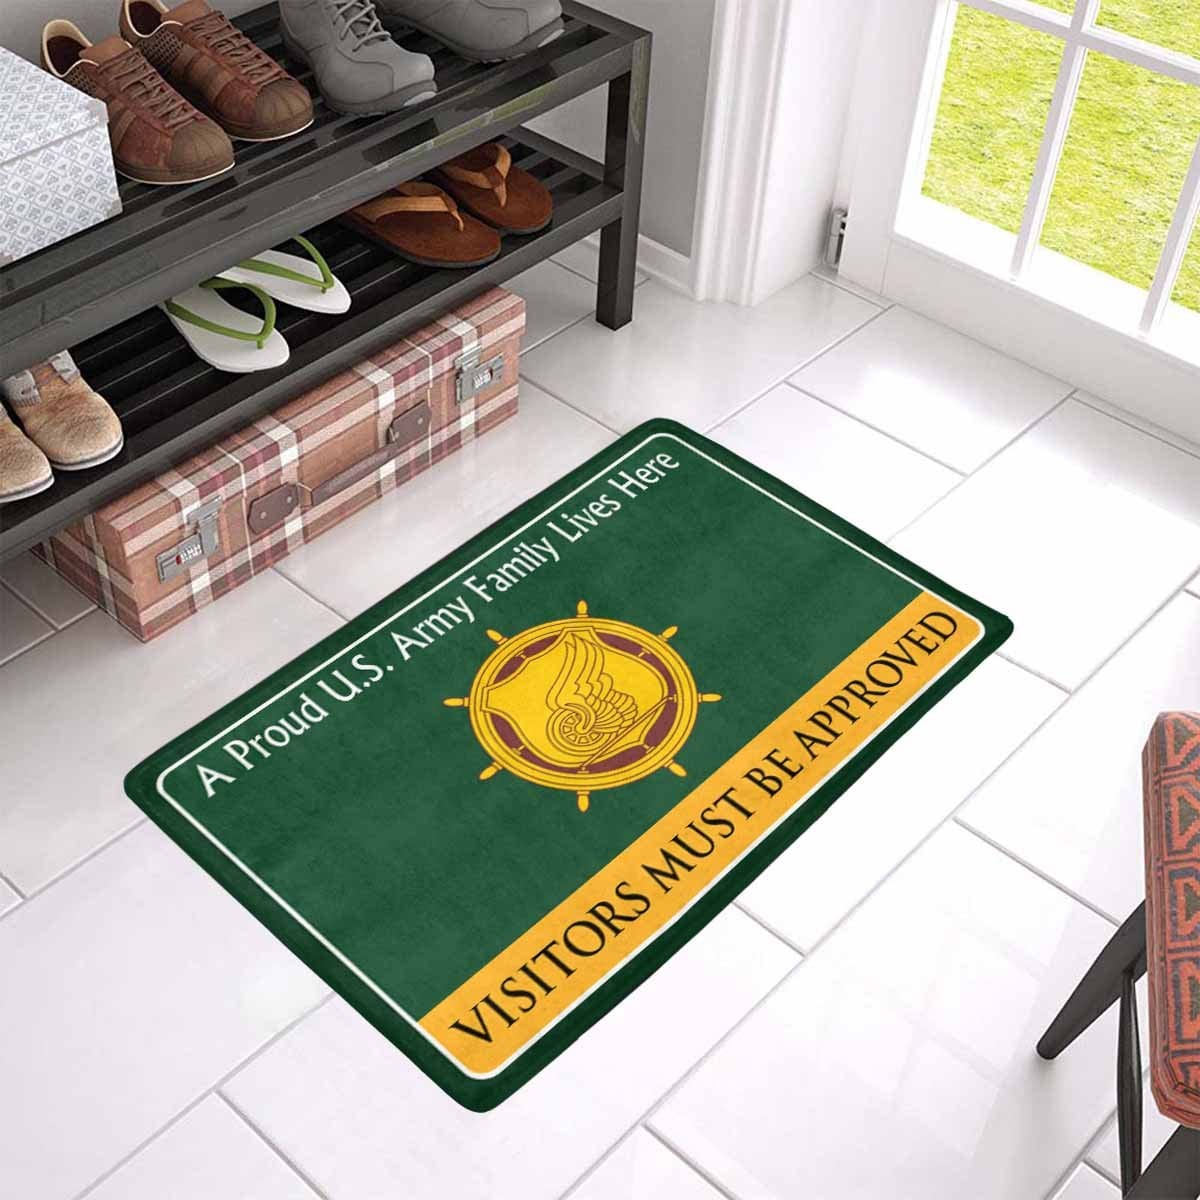 U.S. Army Transportation Corps Family Doormat - Visitors must be approved Doormat (23.6 inches x 15.7 inches)-Doormat-Army-Branch-Veterans Nation